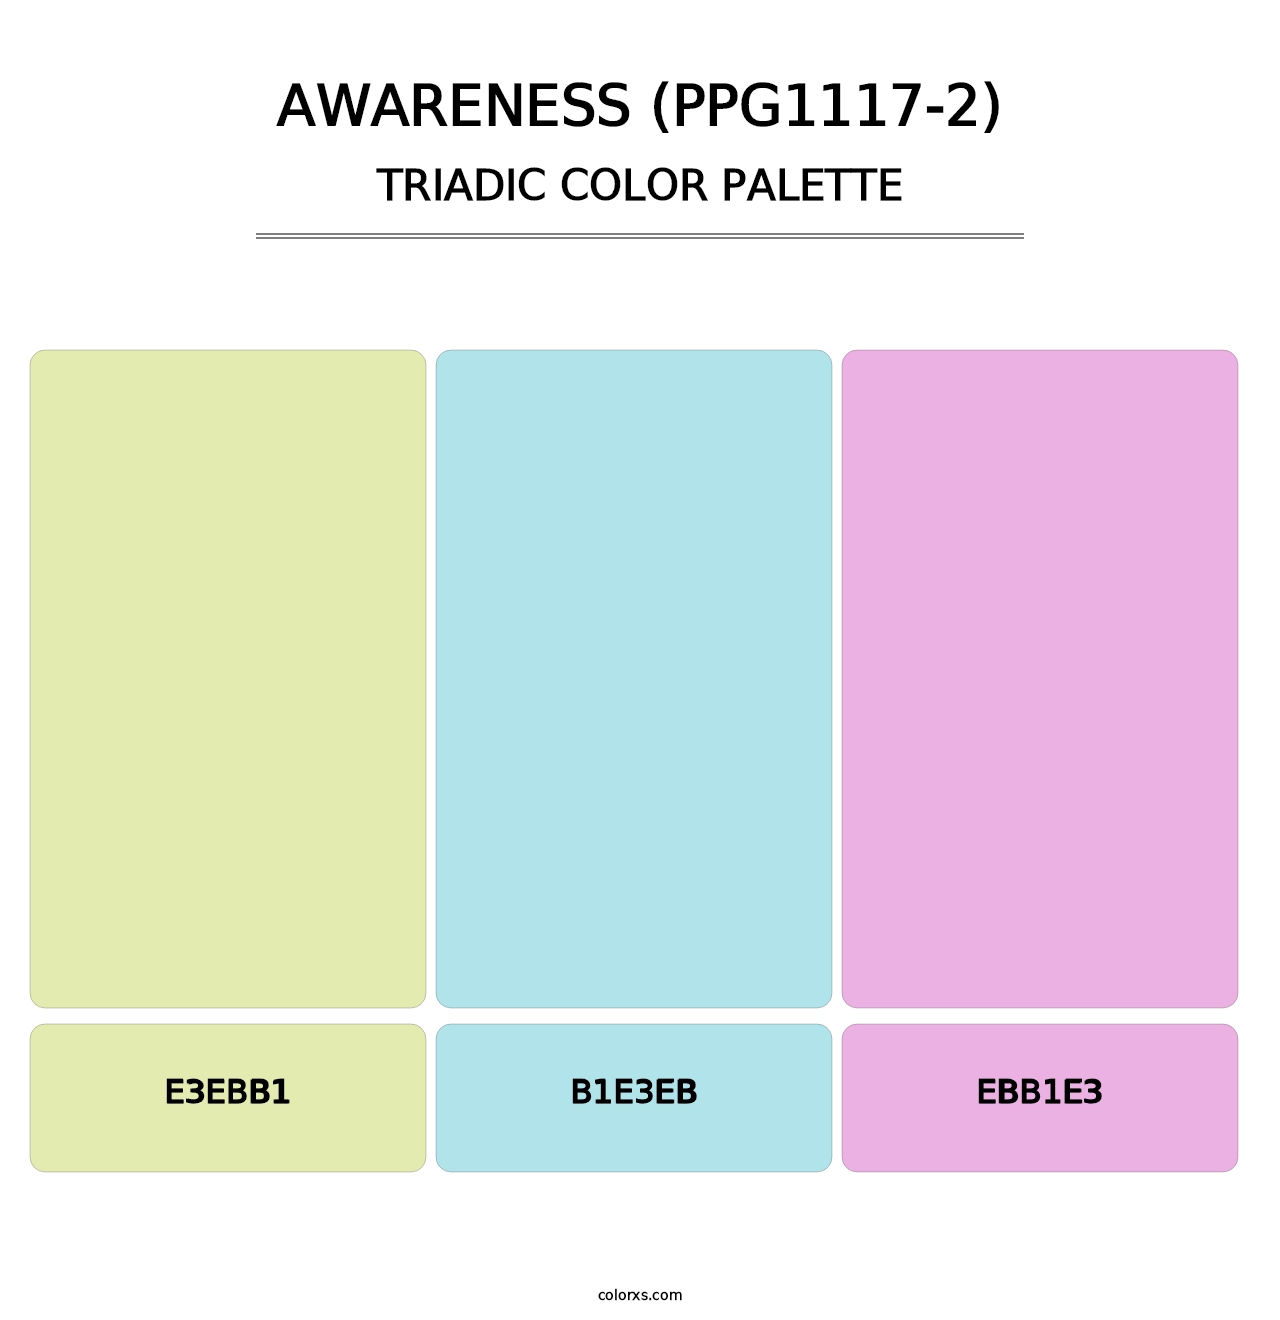 Awareness (PPG1117-2) - Triadic Color Palette